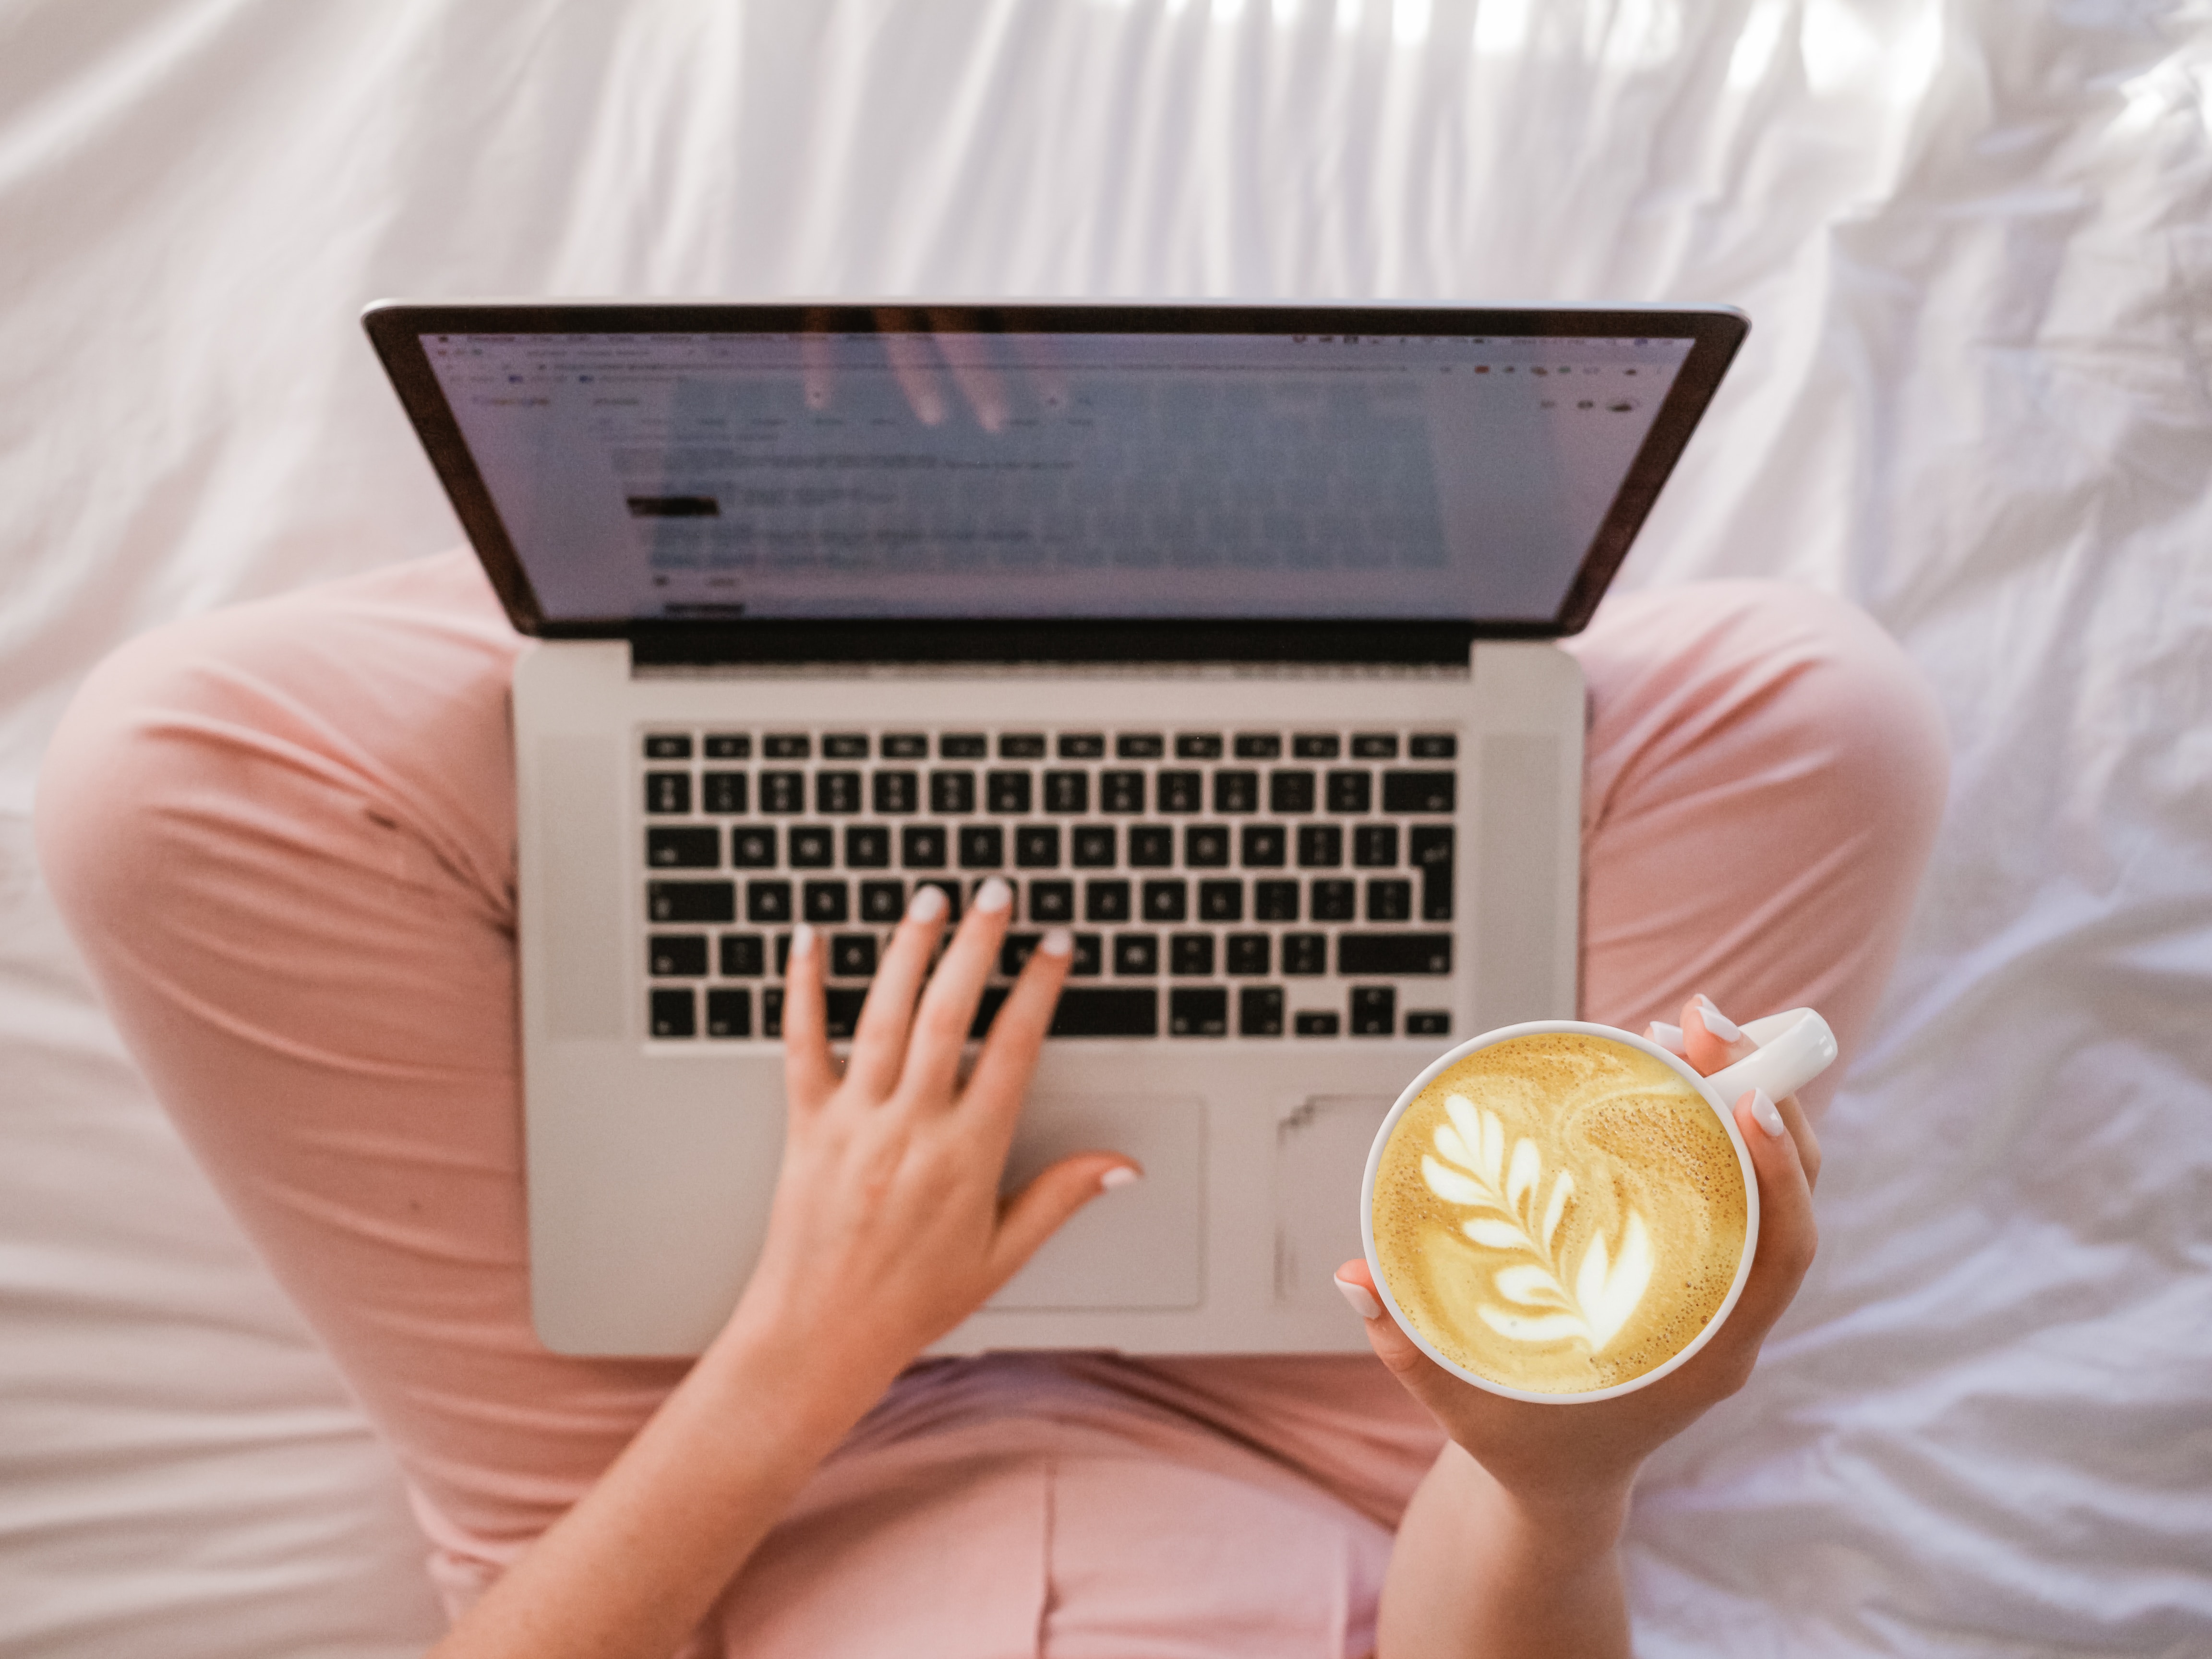 laptop perched on woman's lap with pink pants and cup of coffee